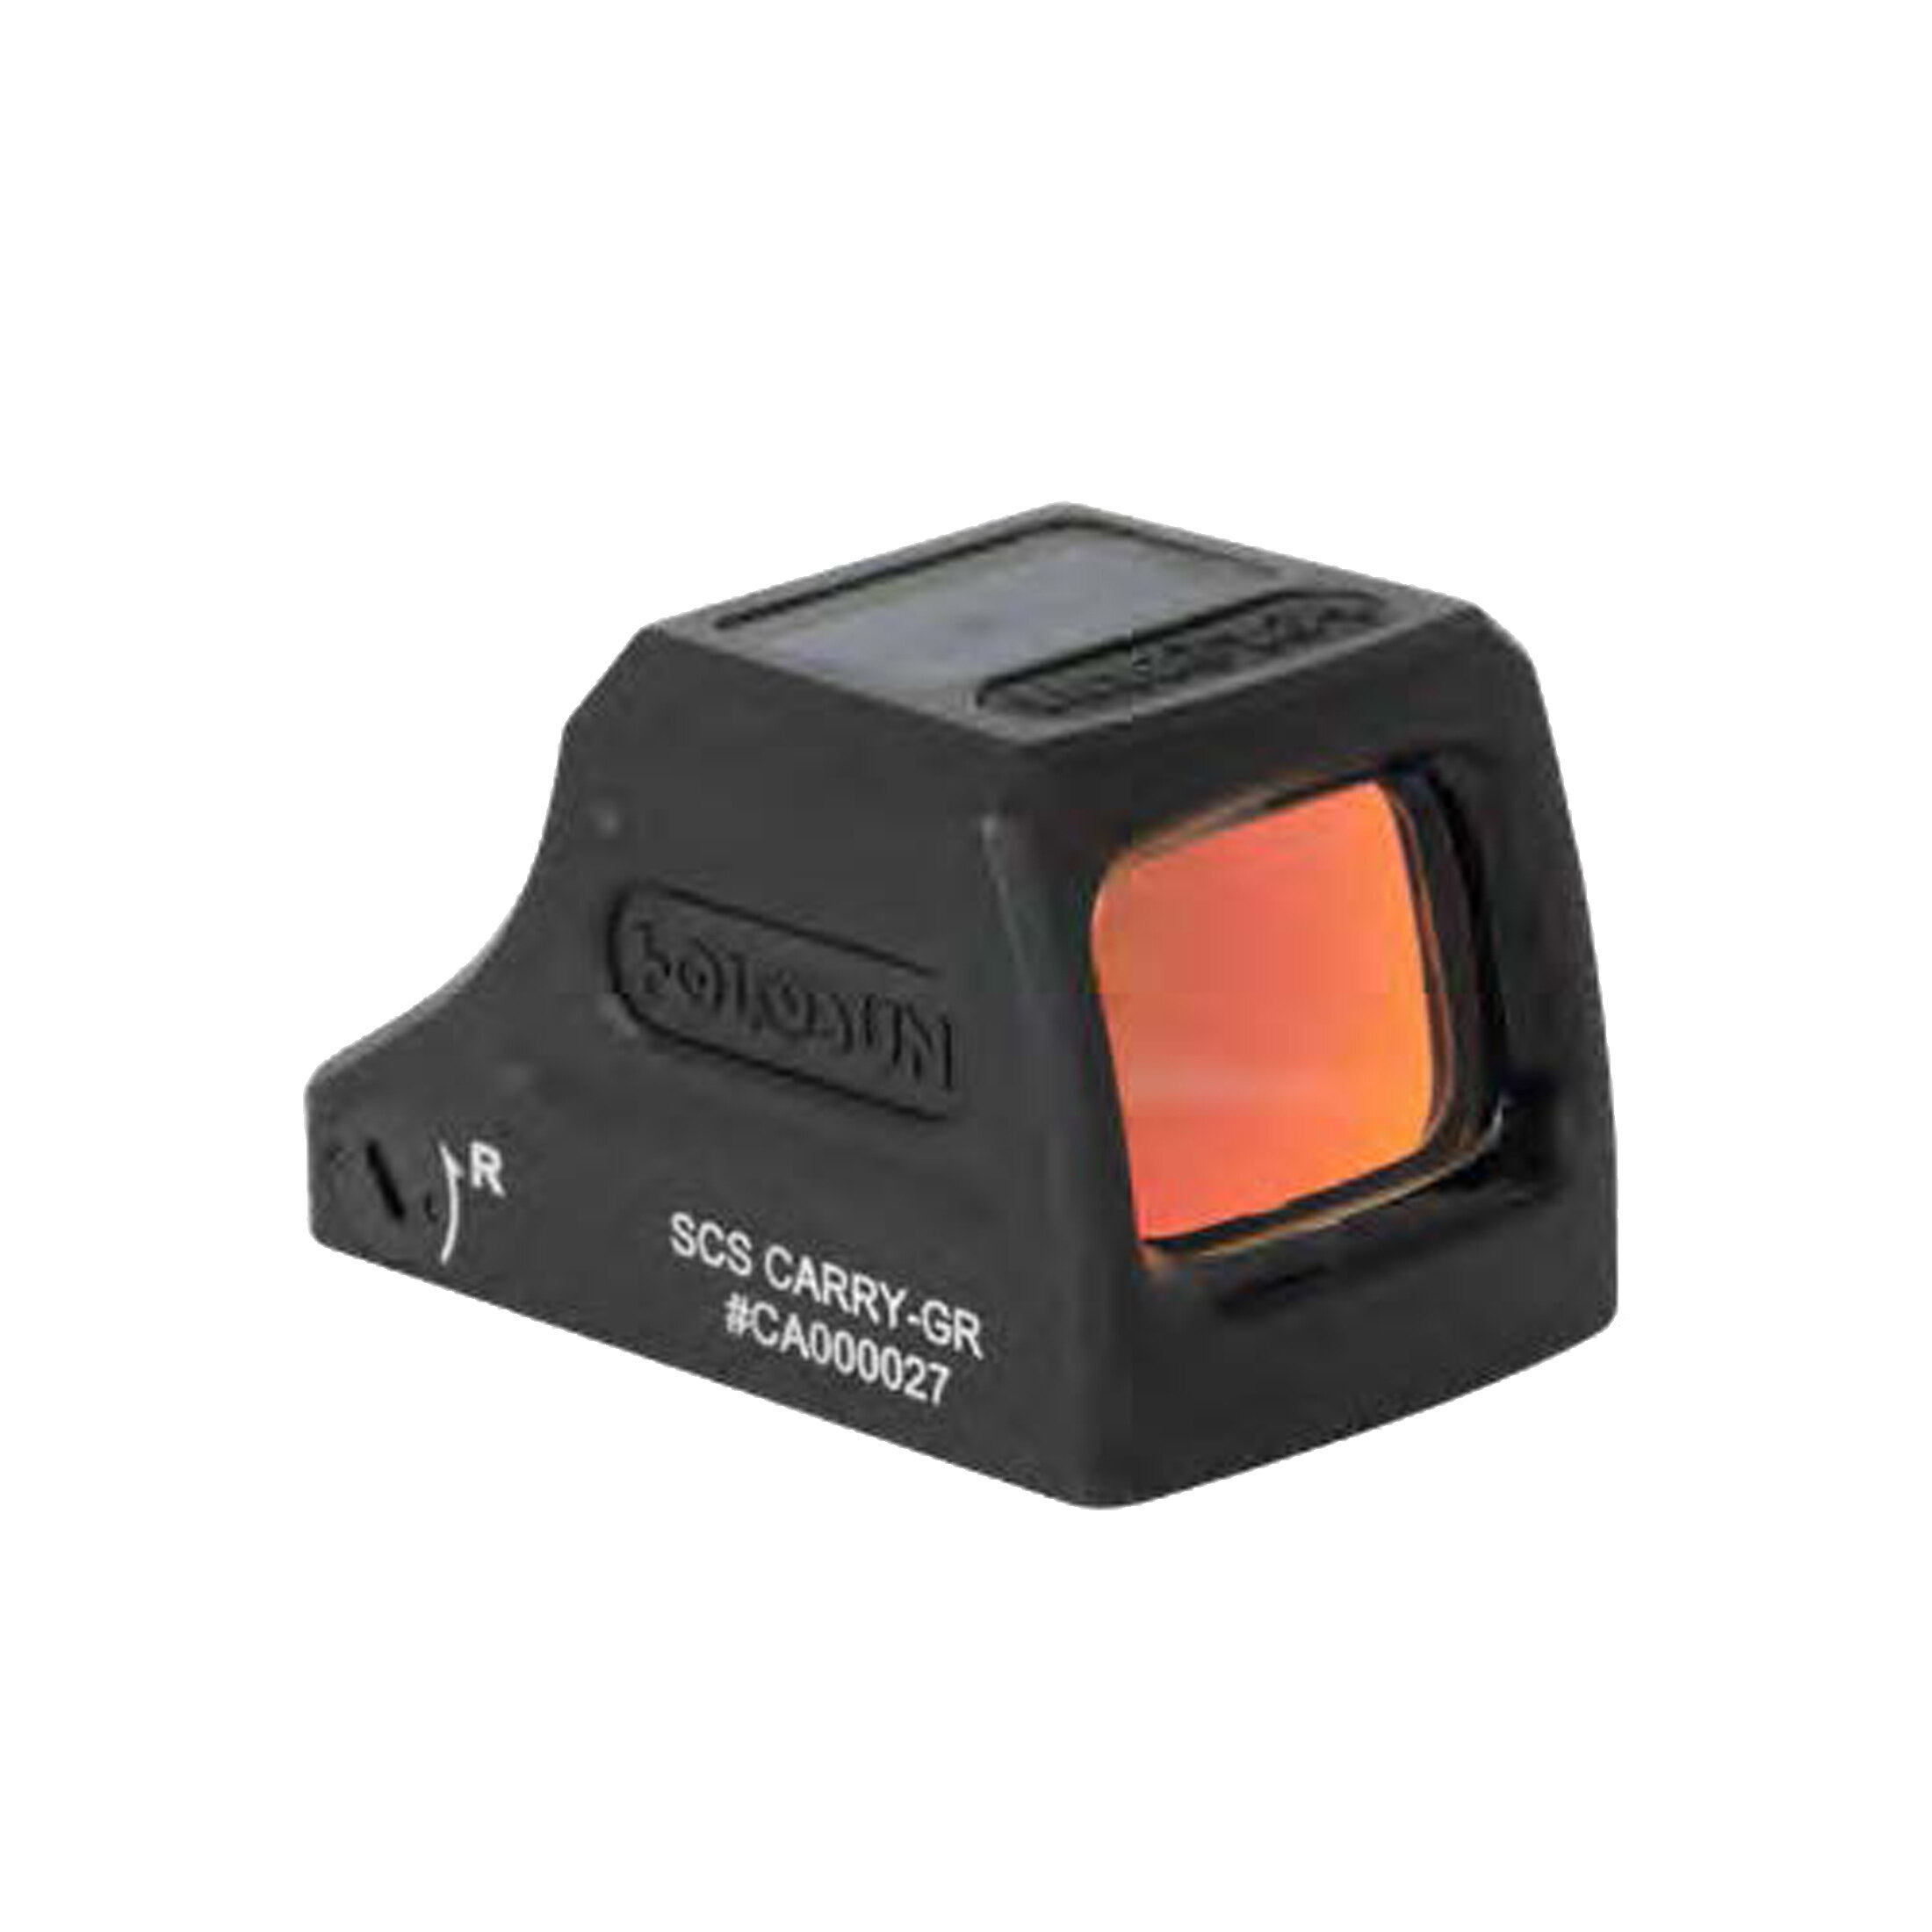 Holosun SCS-CARRY-GR enclosed reflex green dot sight switchable 2MOA dot, 32MOA circle dot reticle …